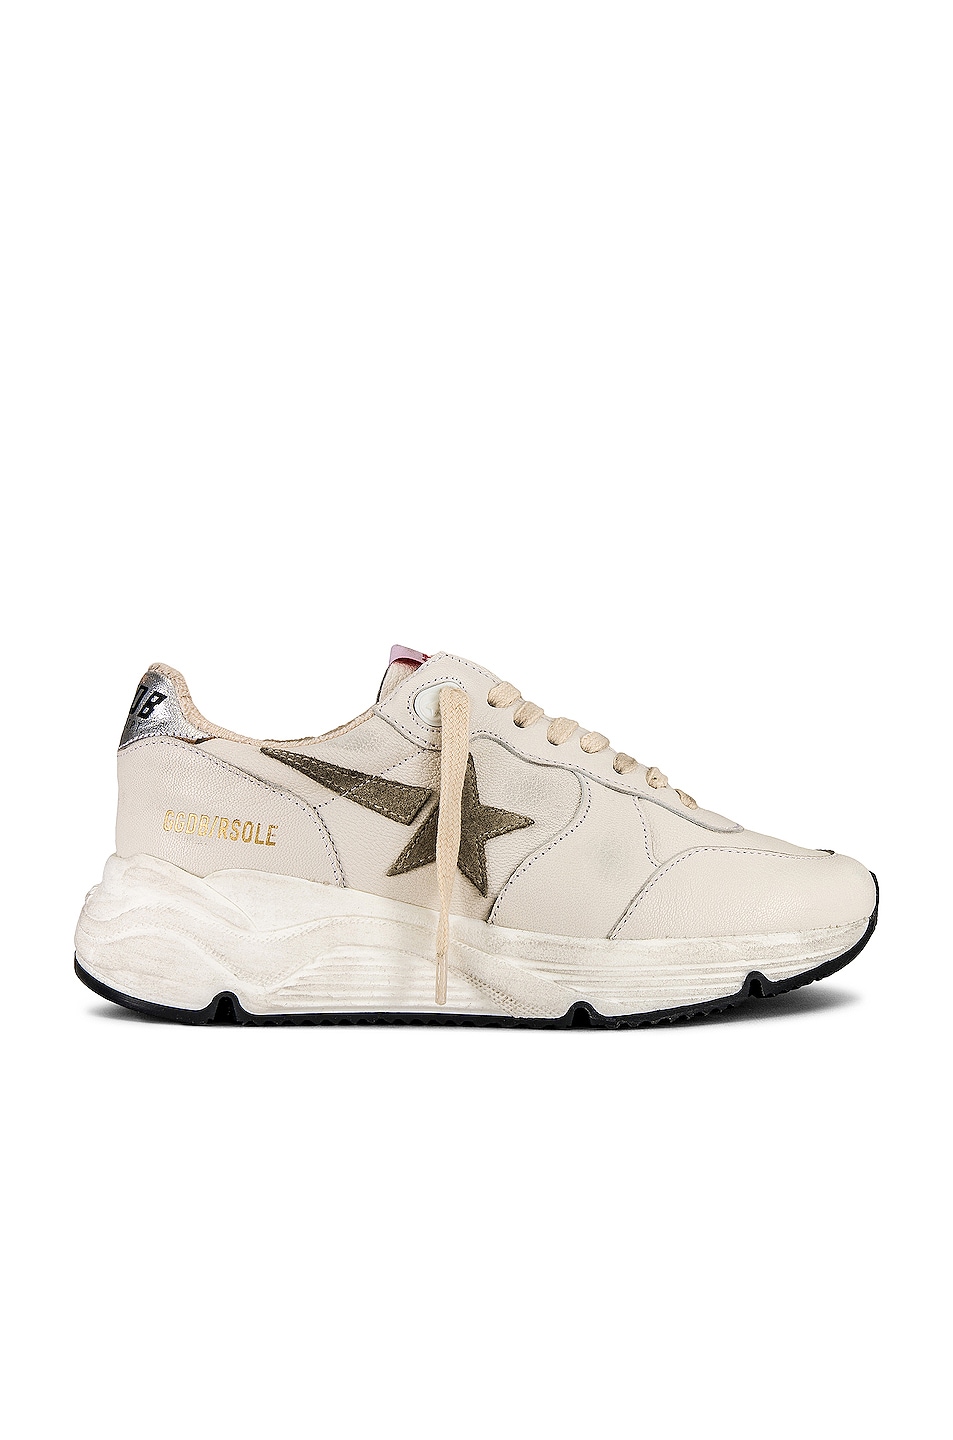 Image 1 of Golden Goose Running Sole Sneaker in White, Taupe, & Silver